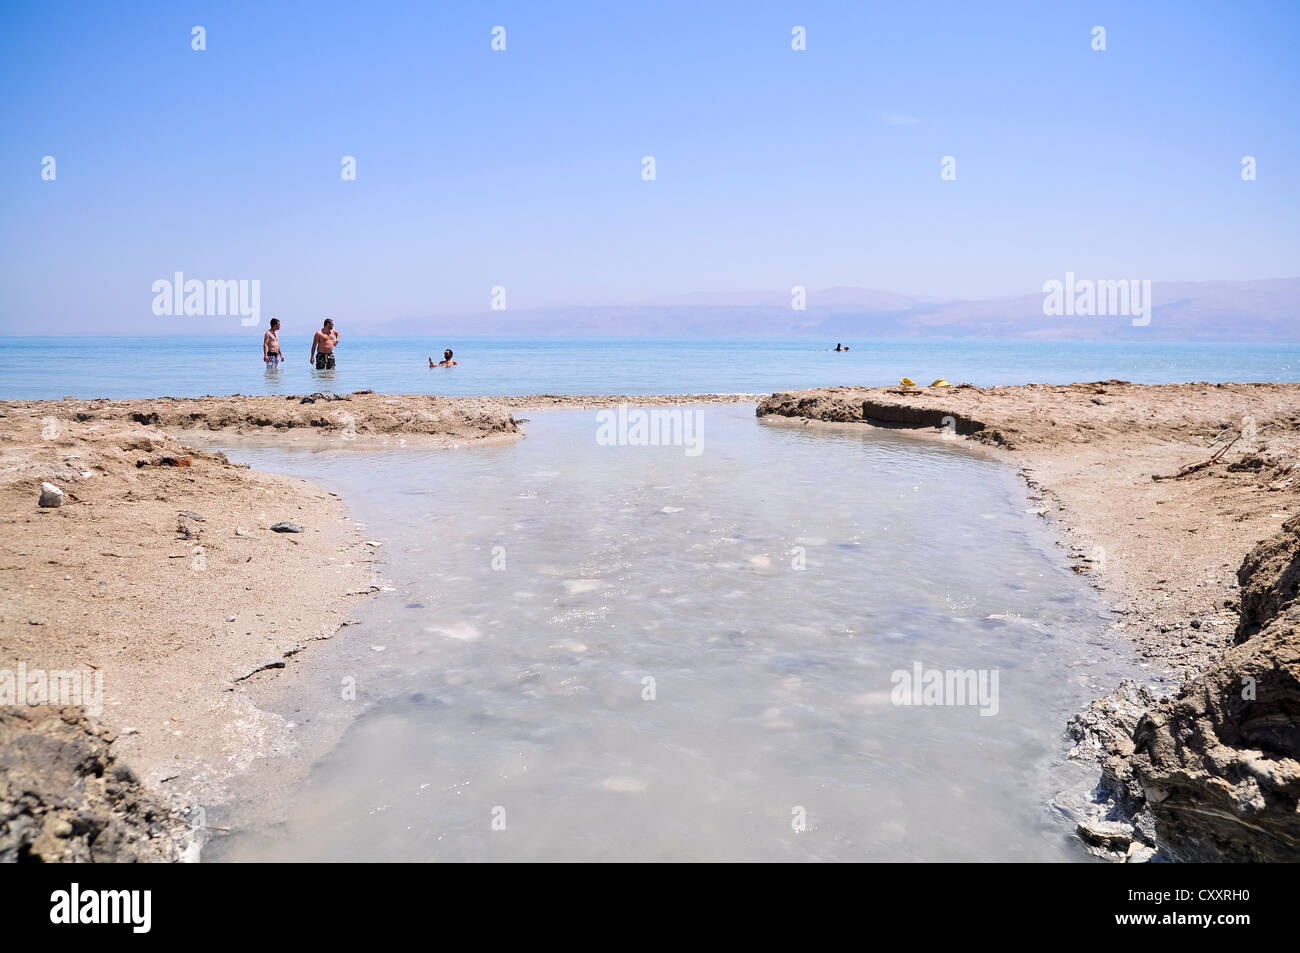 people enjoying the water of the Dead Sea Stock Photo